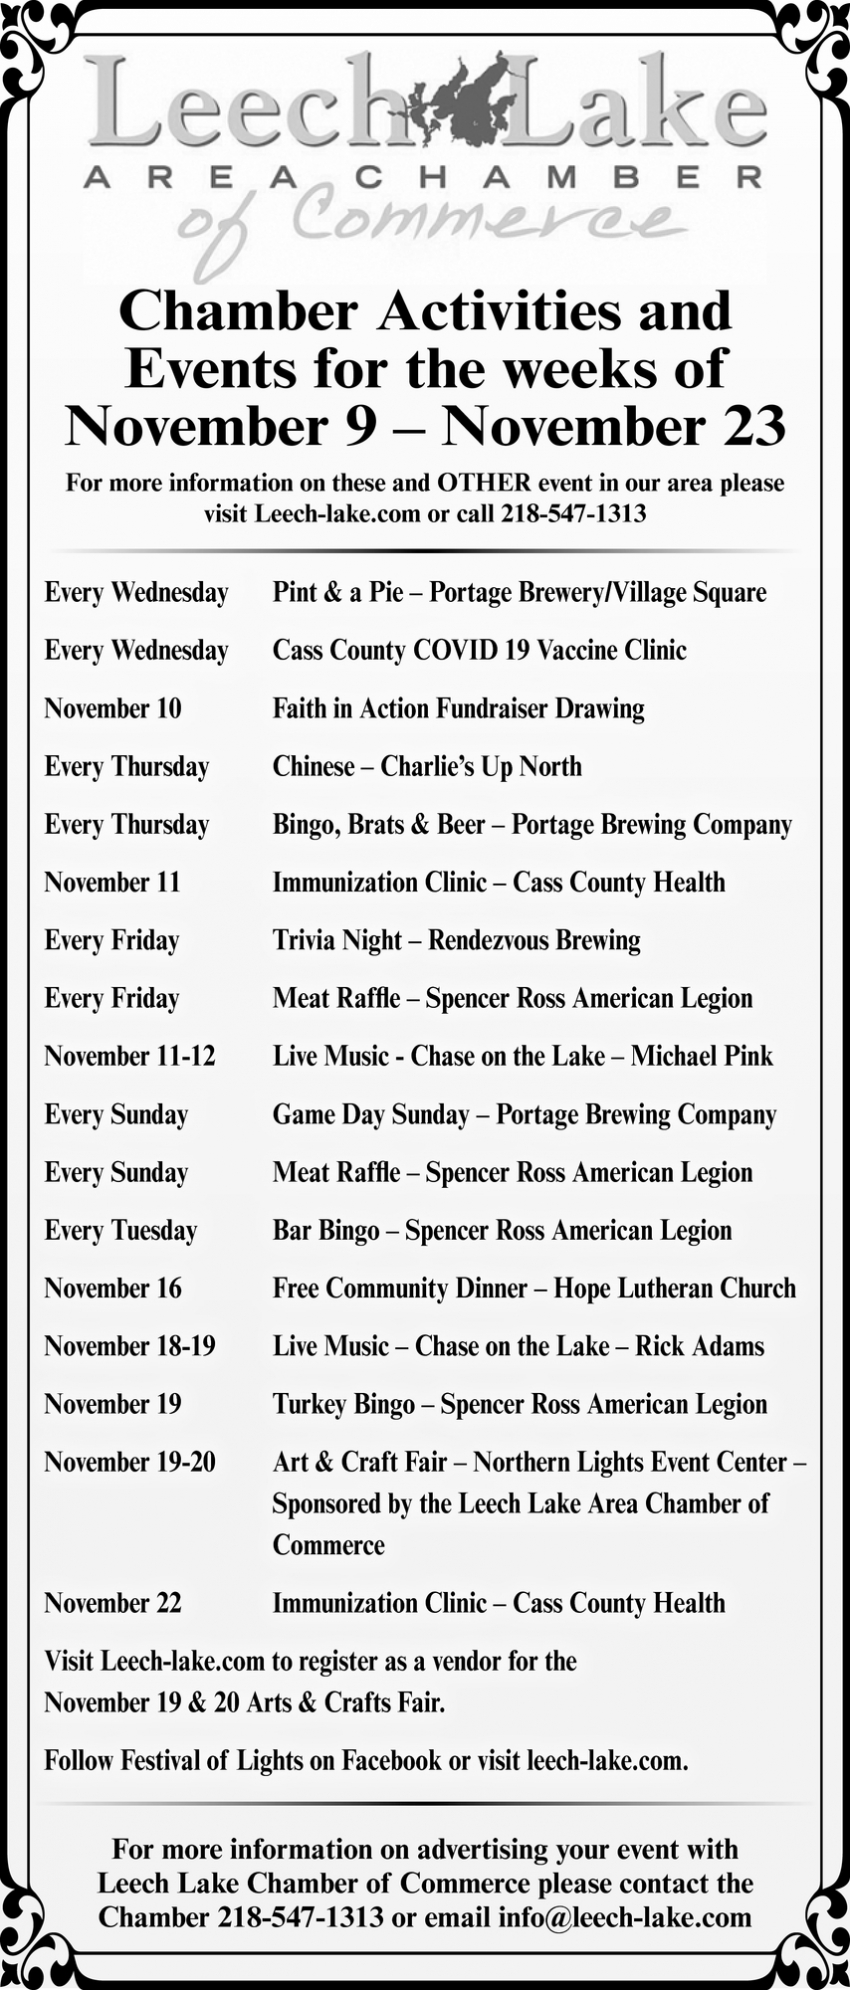 Chamber Activities and Events for the Weeks of November 9 - November 23